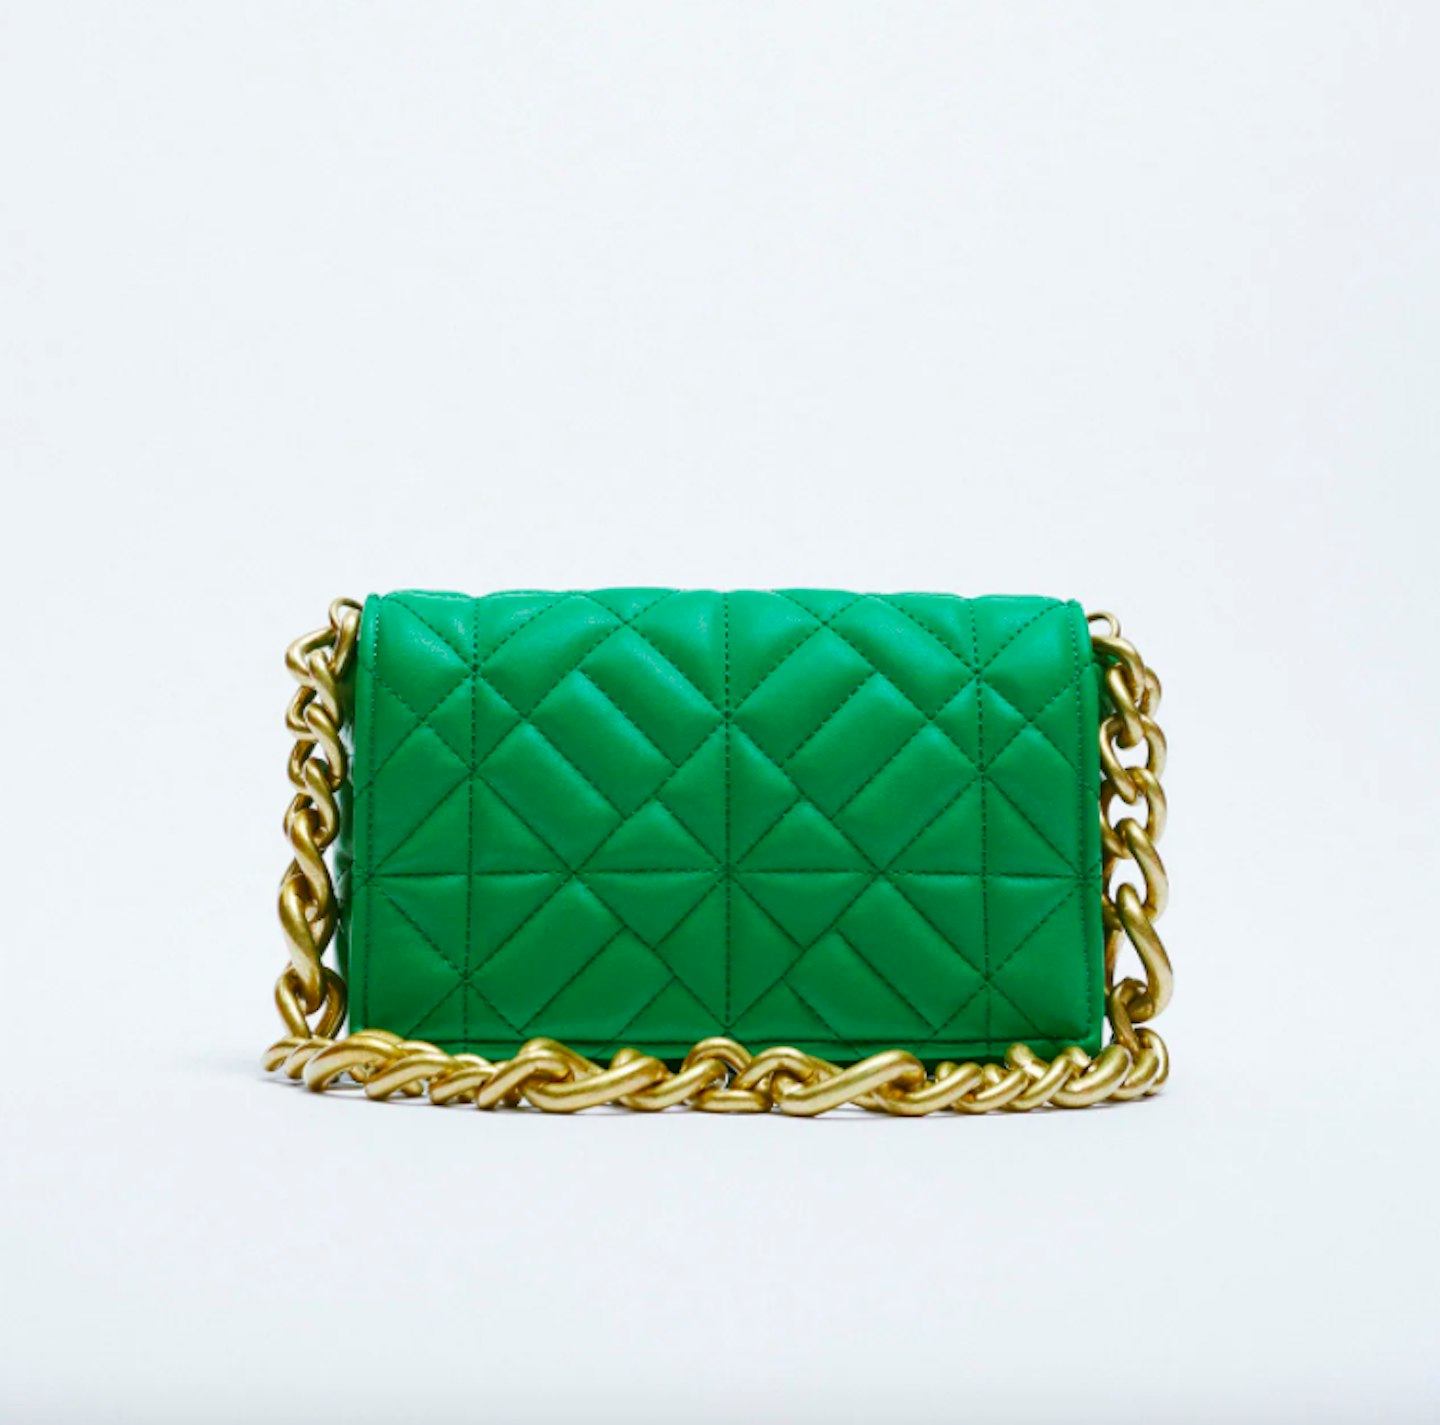 Zara, Quilted Shoulder Bag With Chain, £25.99